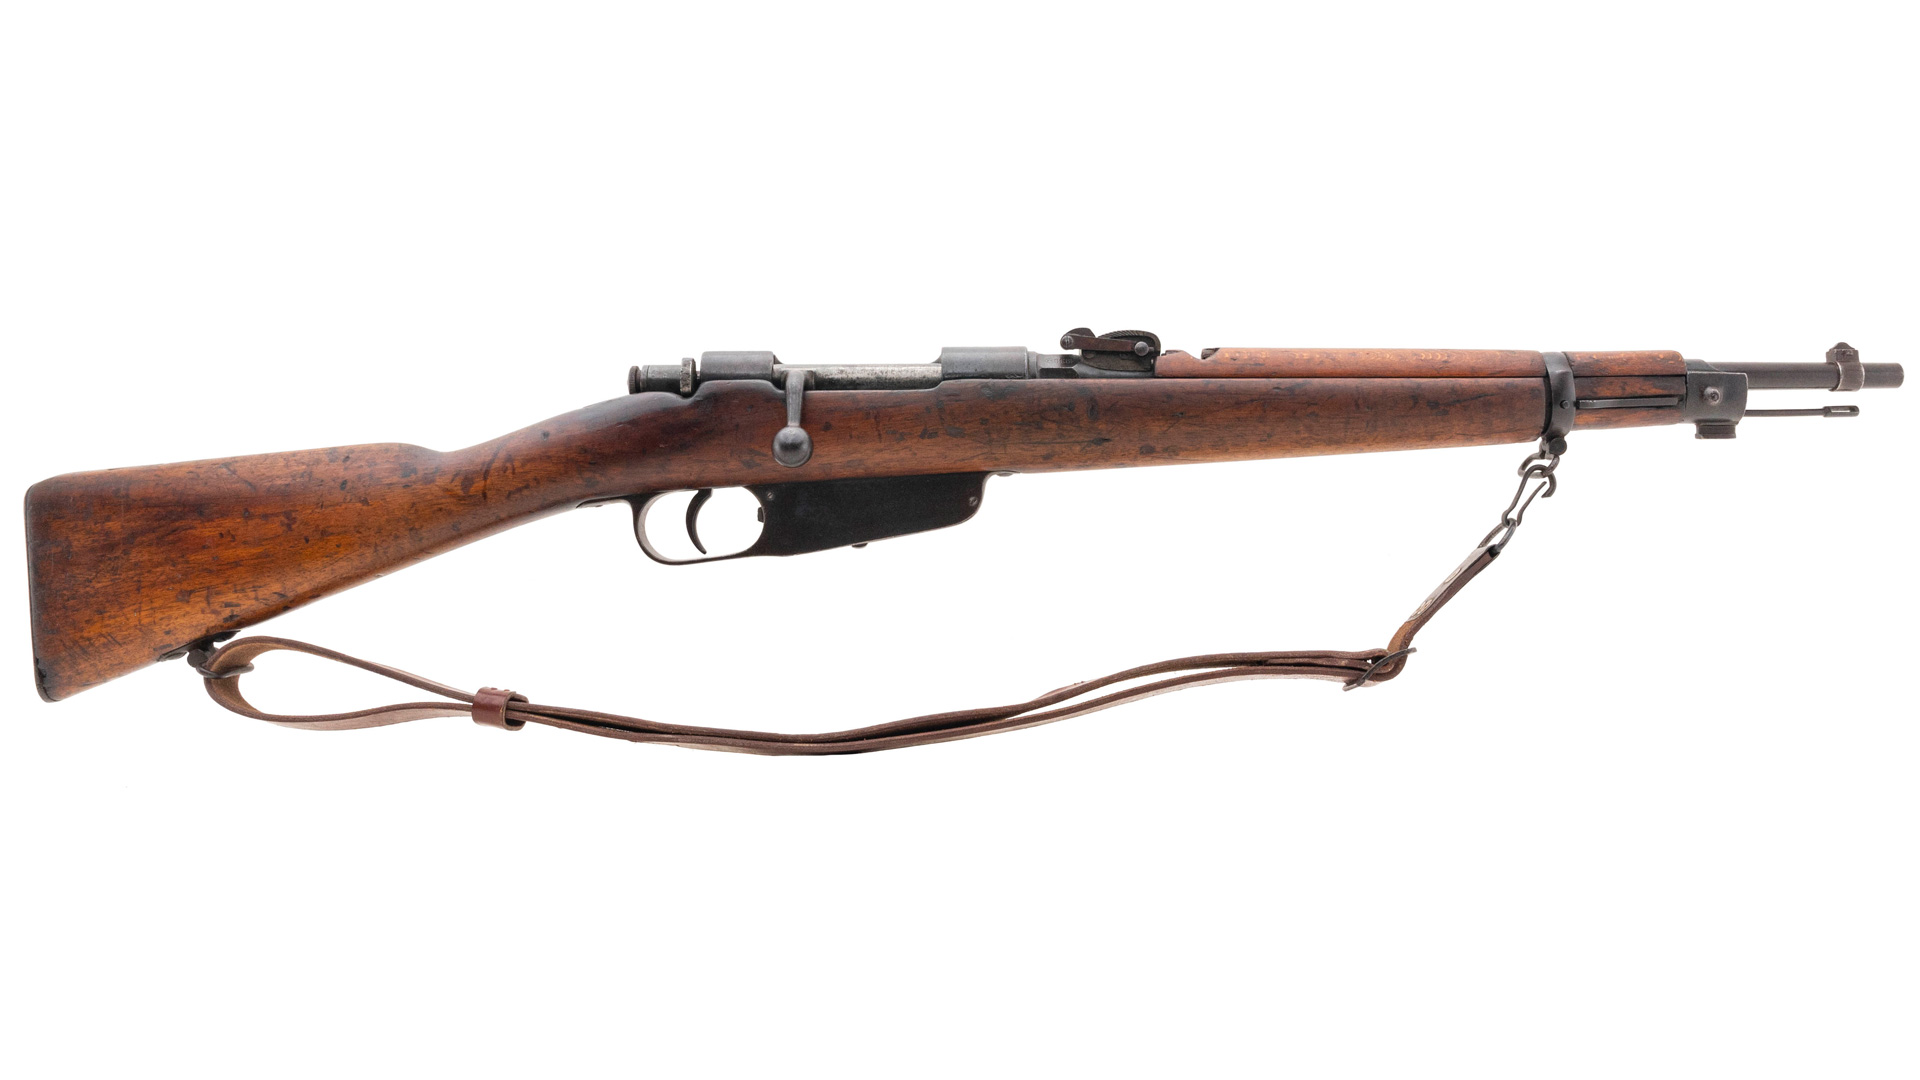 I Have This Old Gun: Carcano TS Carbine